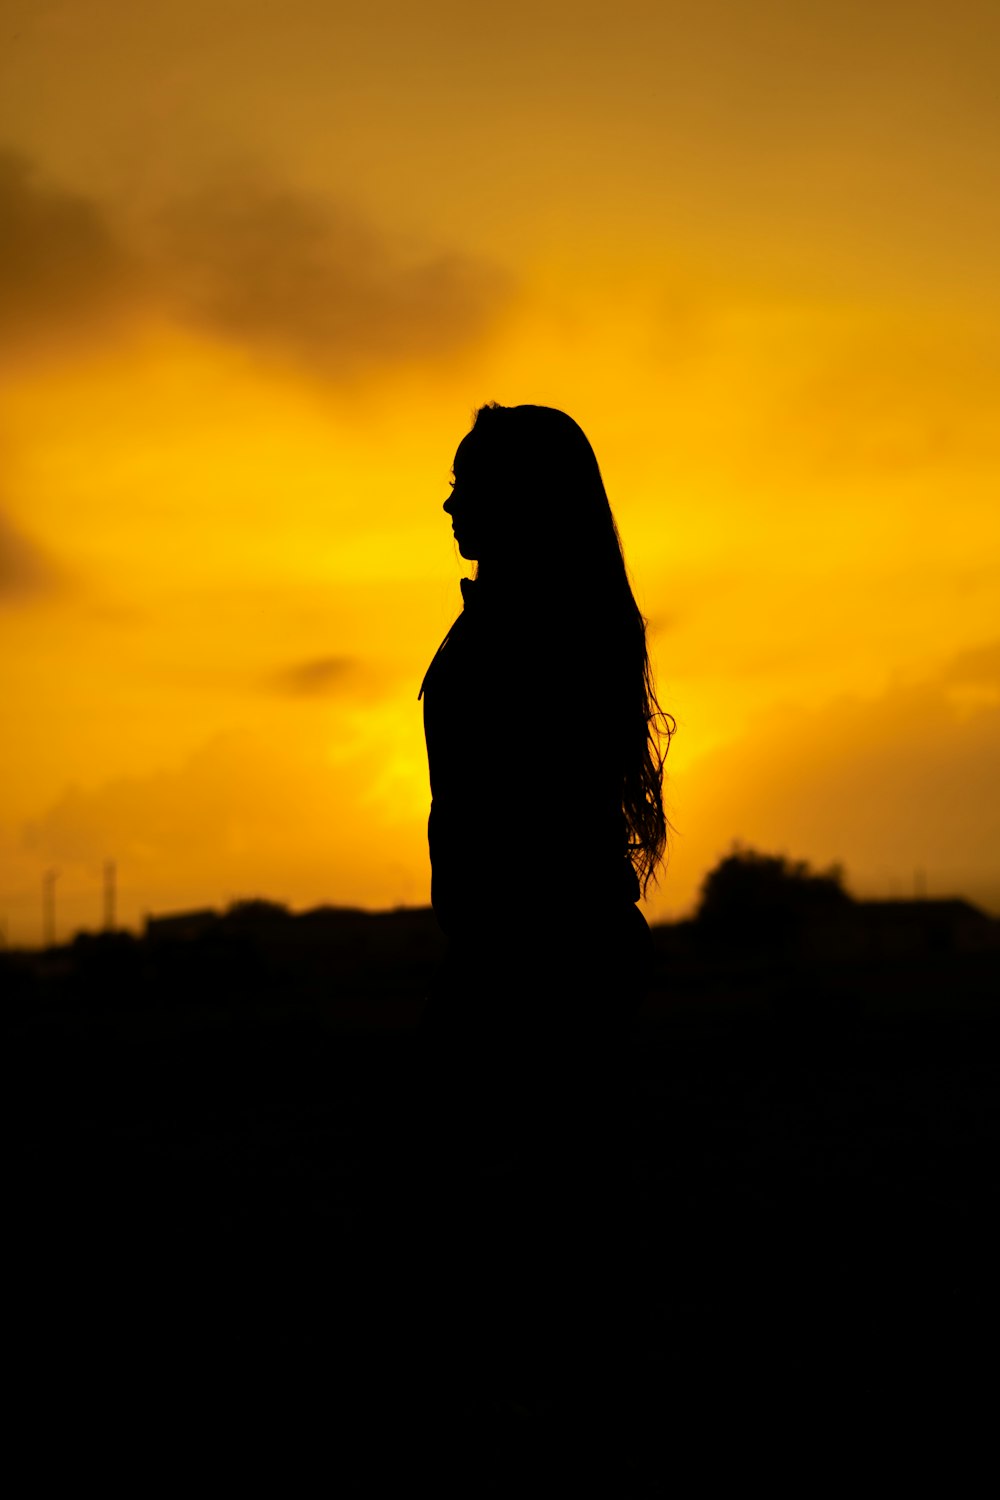 a silhouette of a person standing in front of a sunset